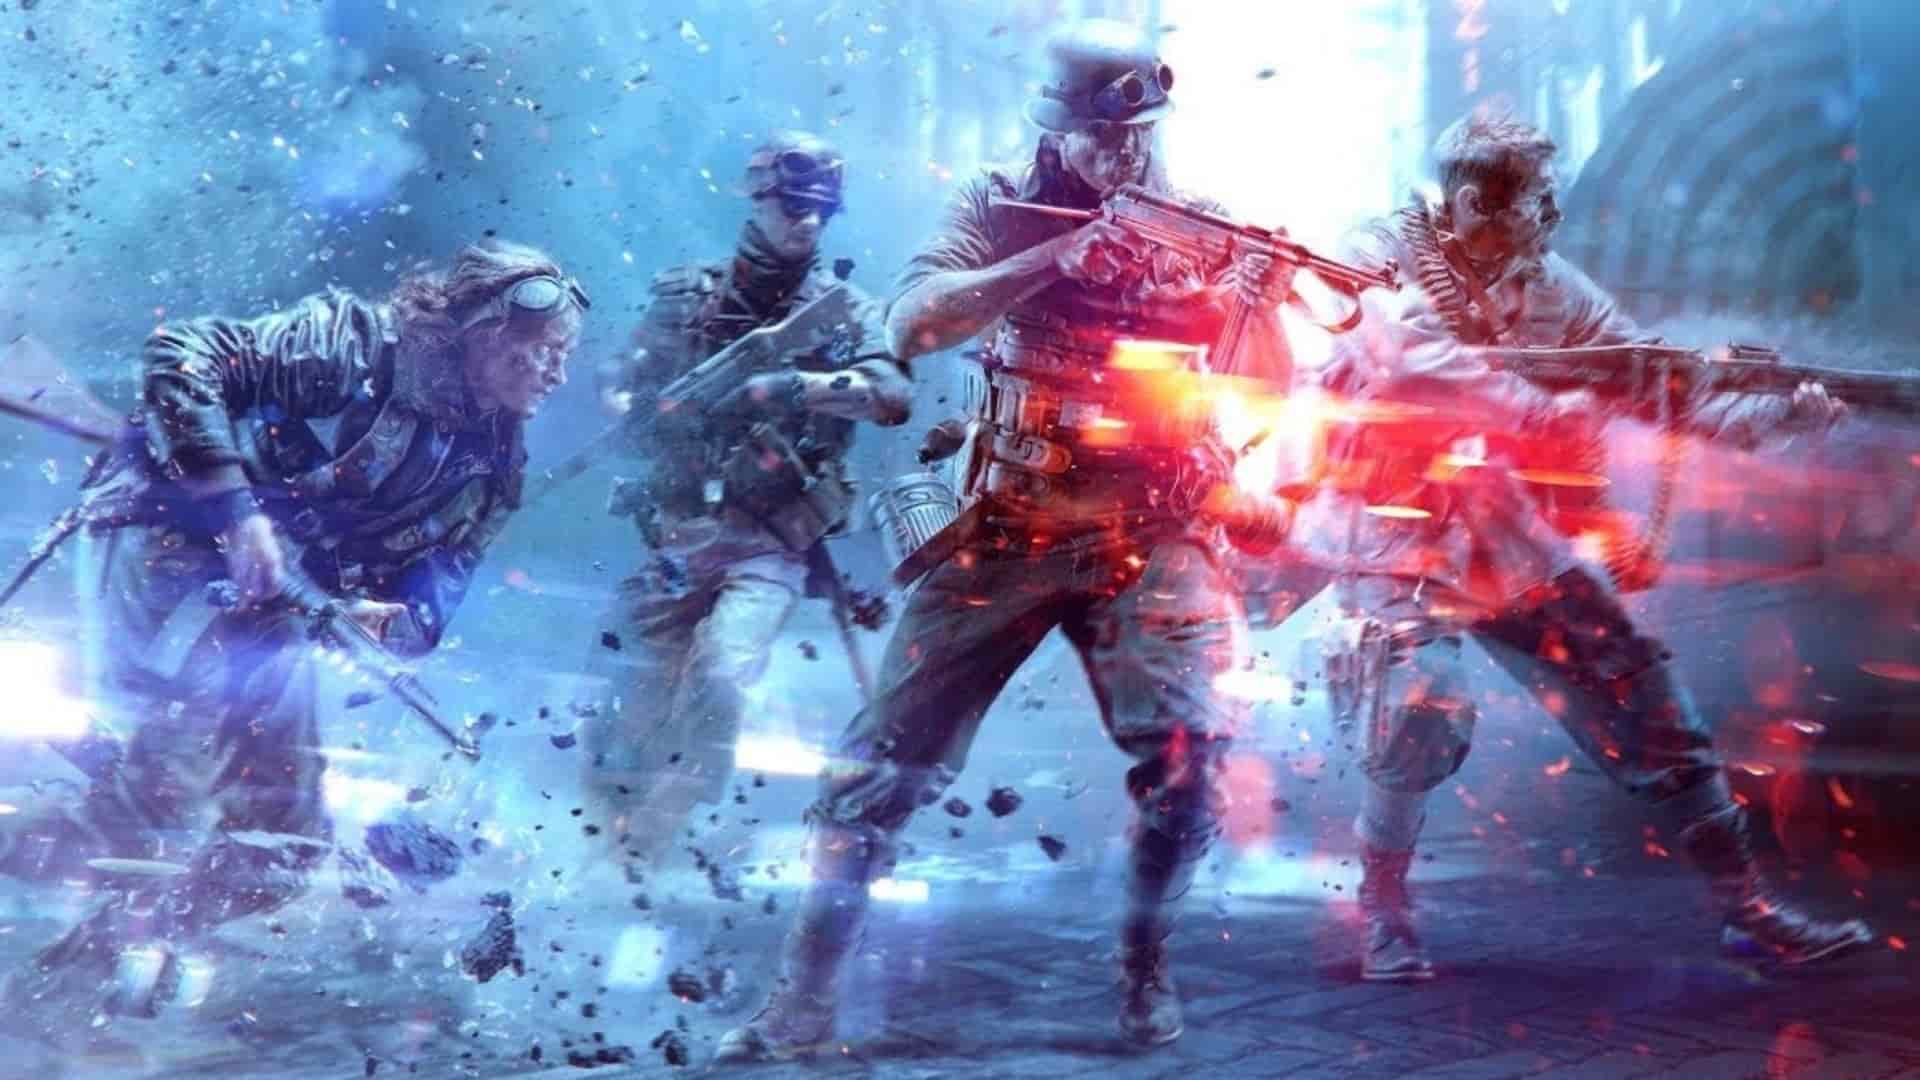 Rumor: Battlefield 6 Campaign Will Feature Co